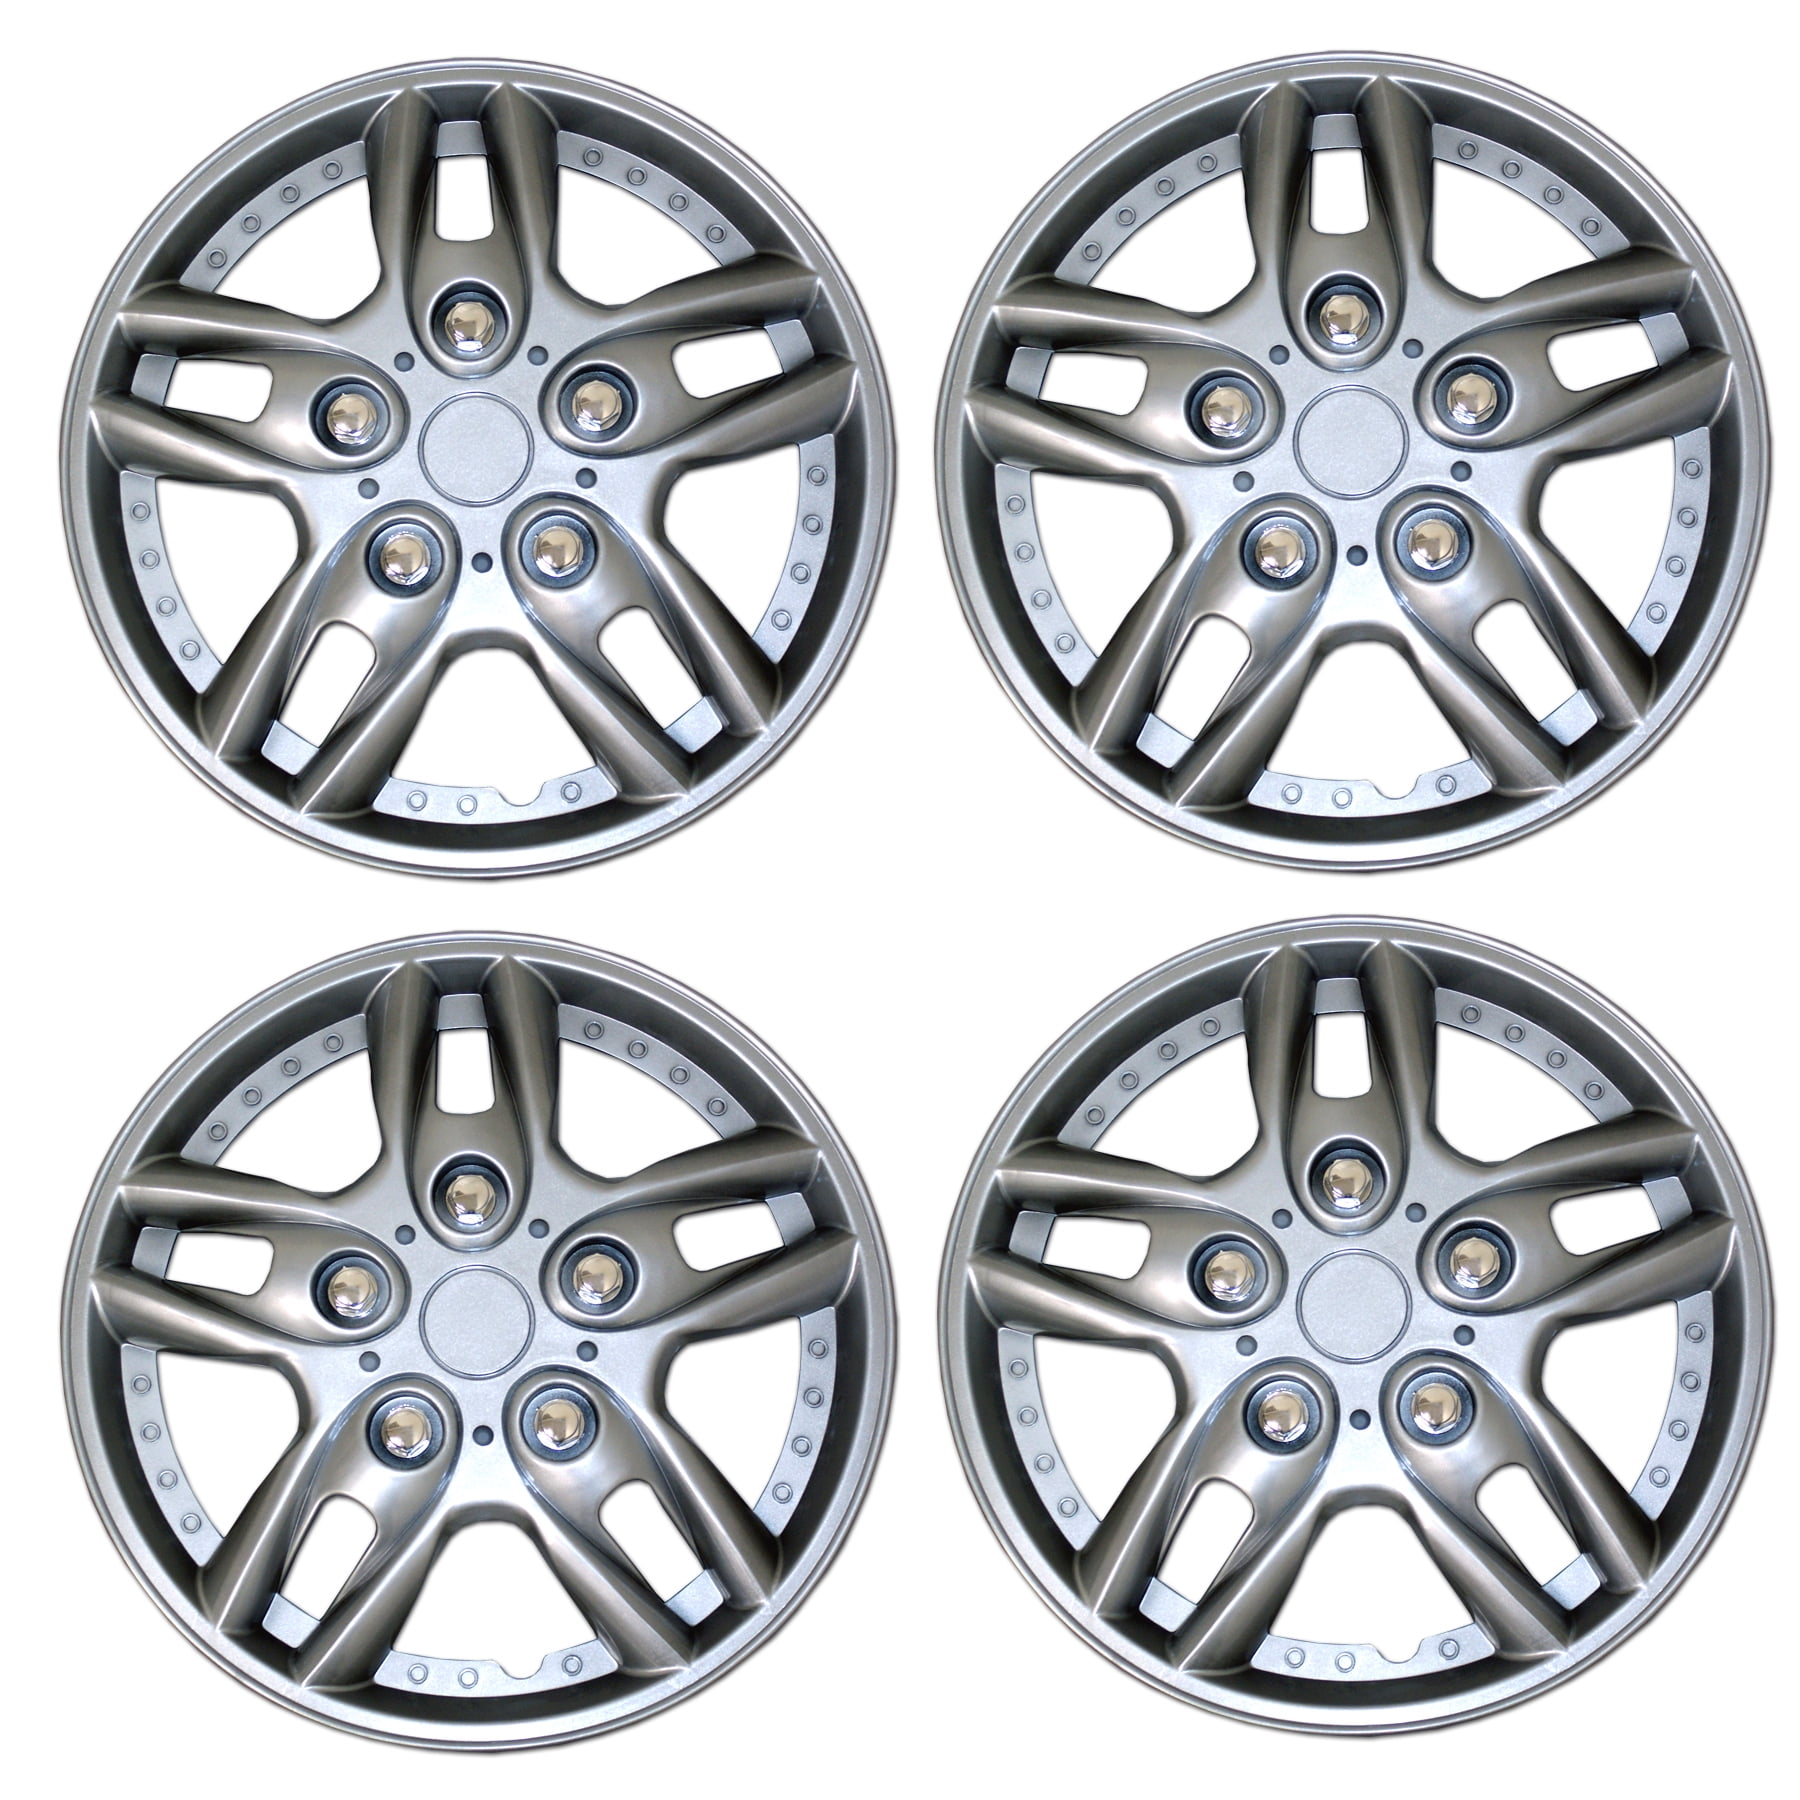 TuningPros WSC-515S15 Hubcaps Wheel Skin Cover 15-Inches Silver Set of 4 